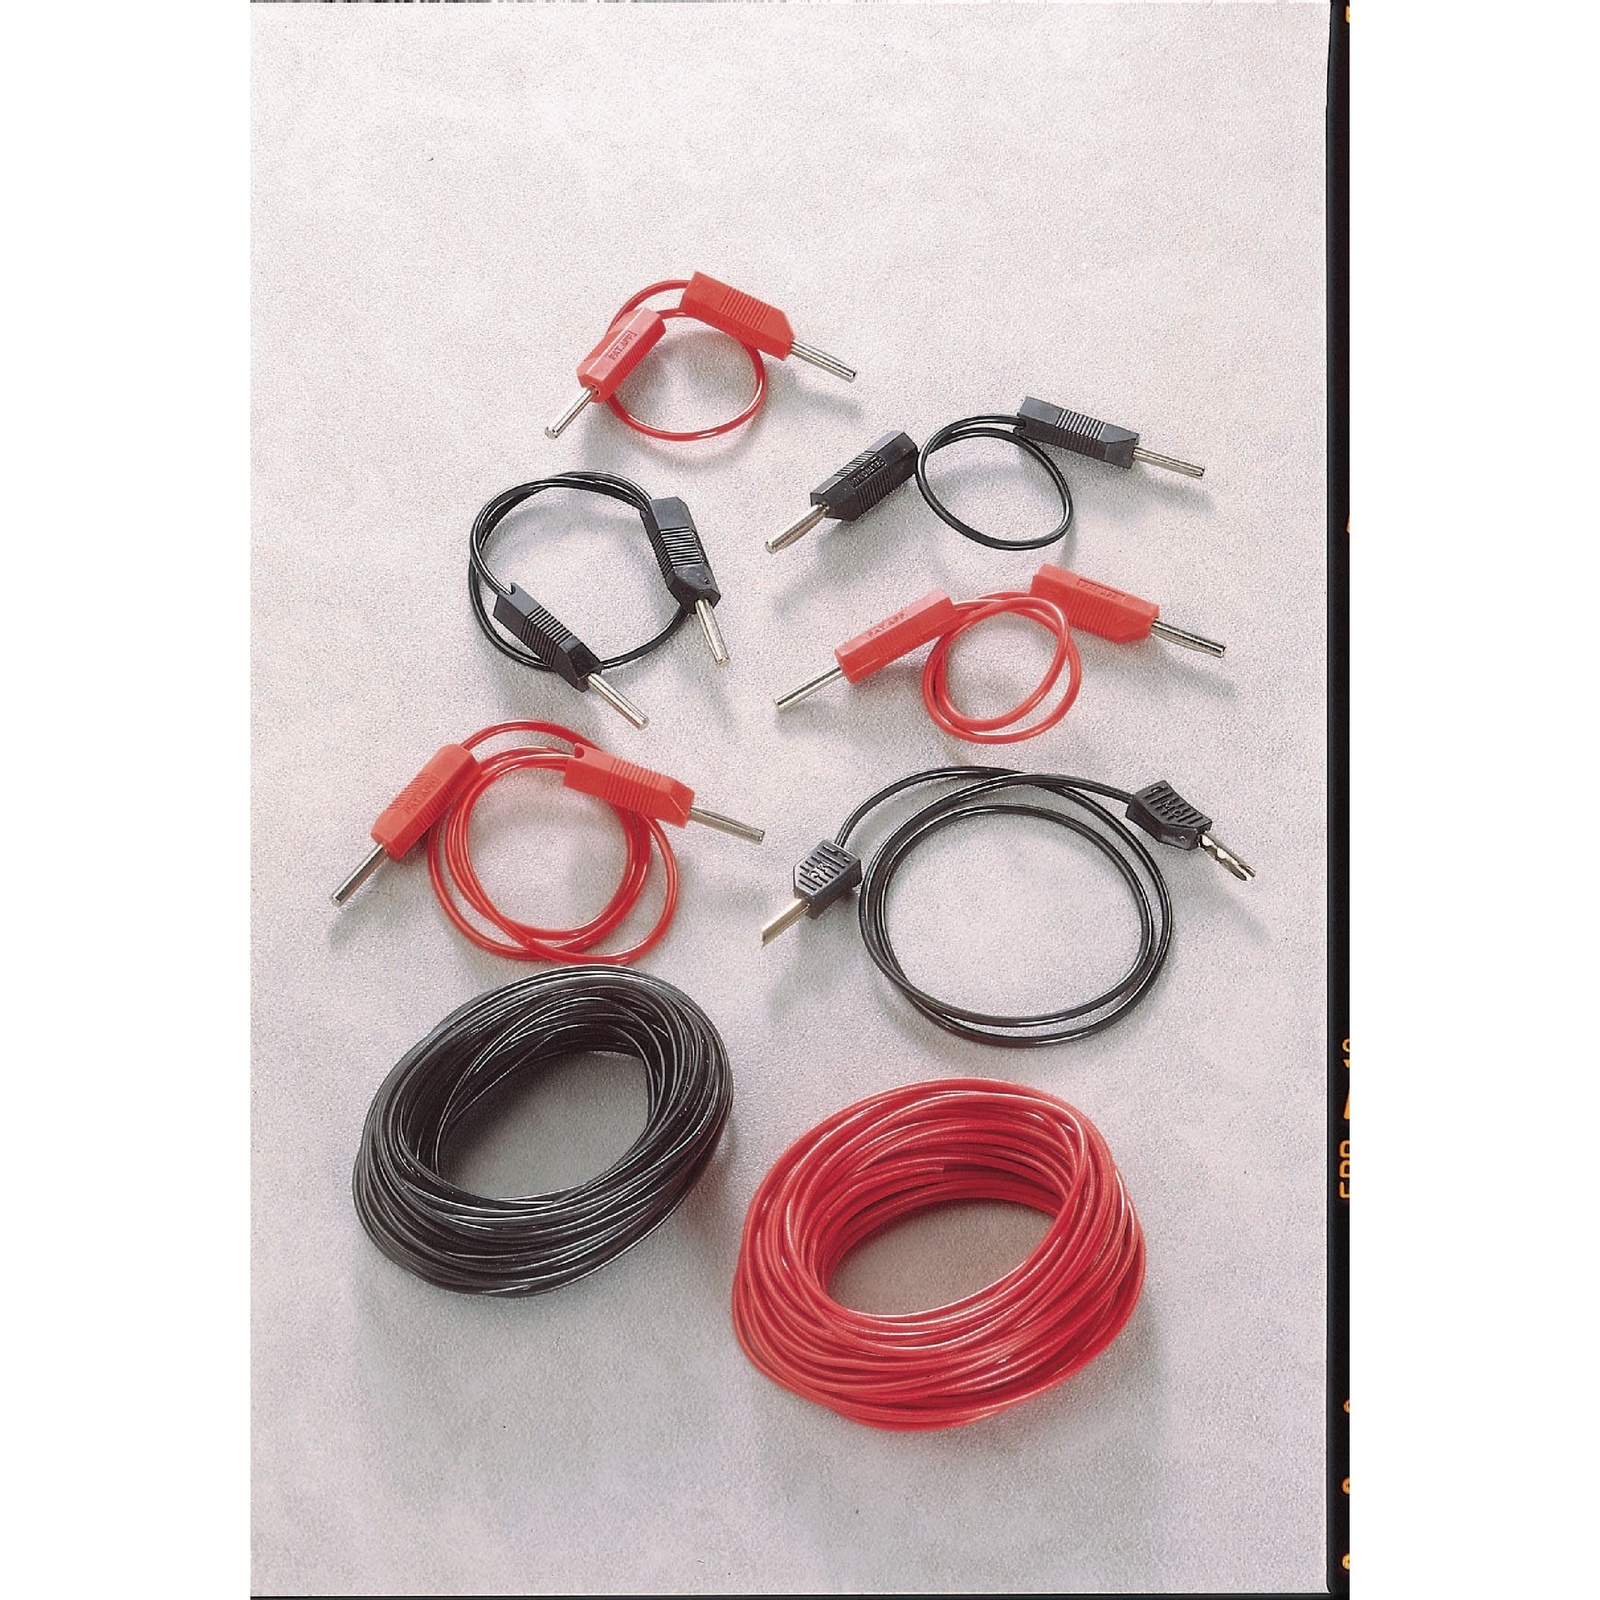 4mm Stackable Plug Leads - Red 750mm